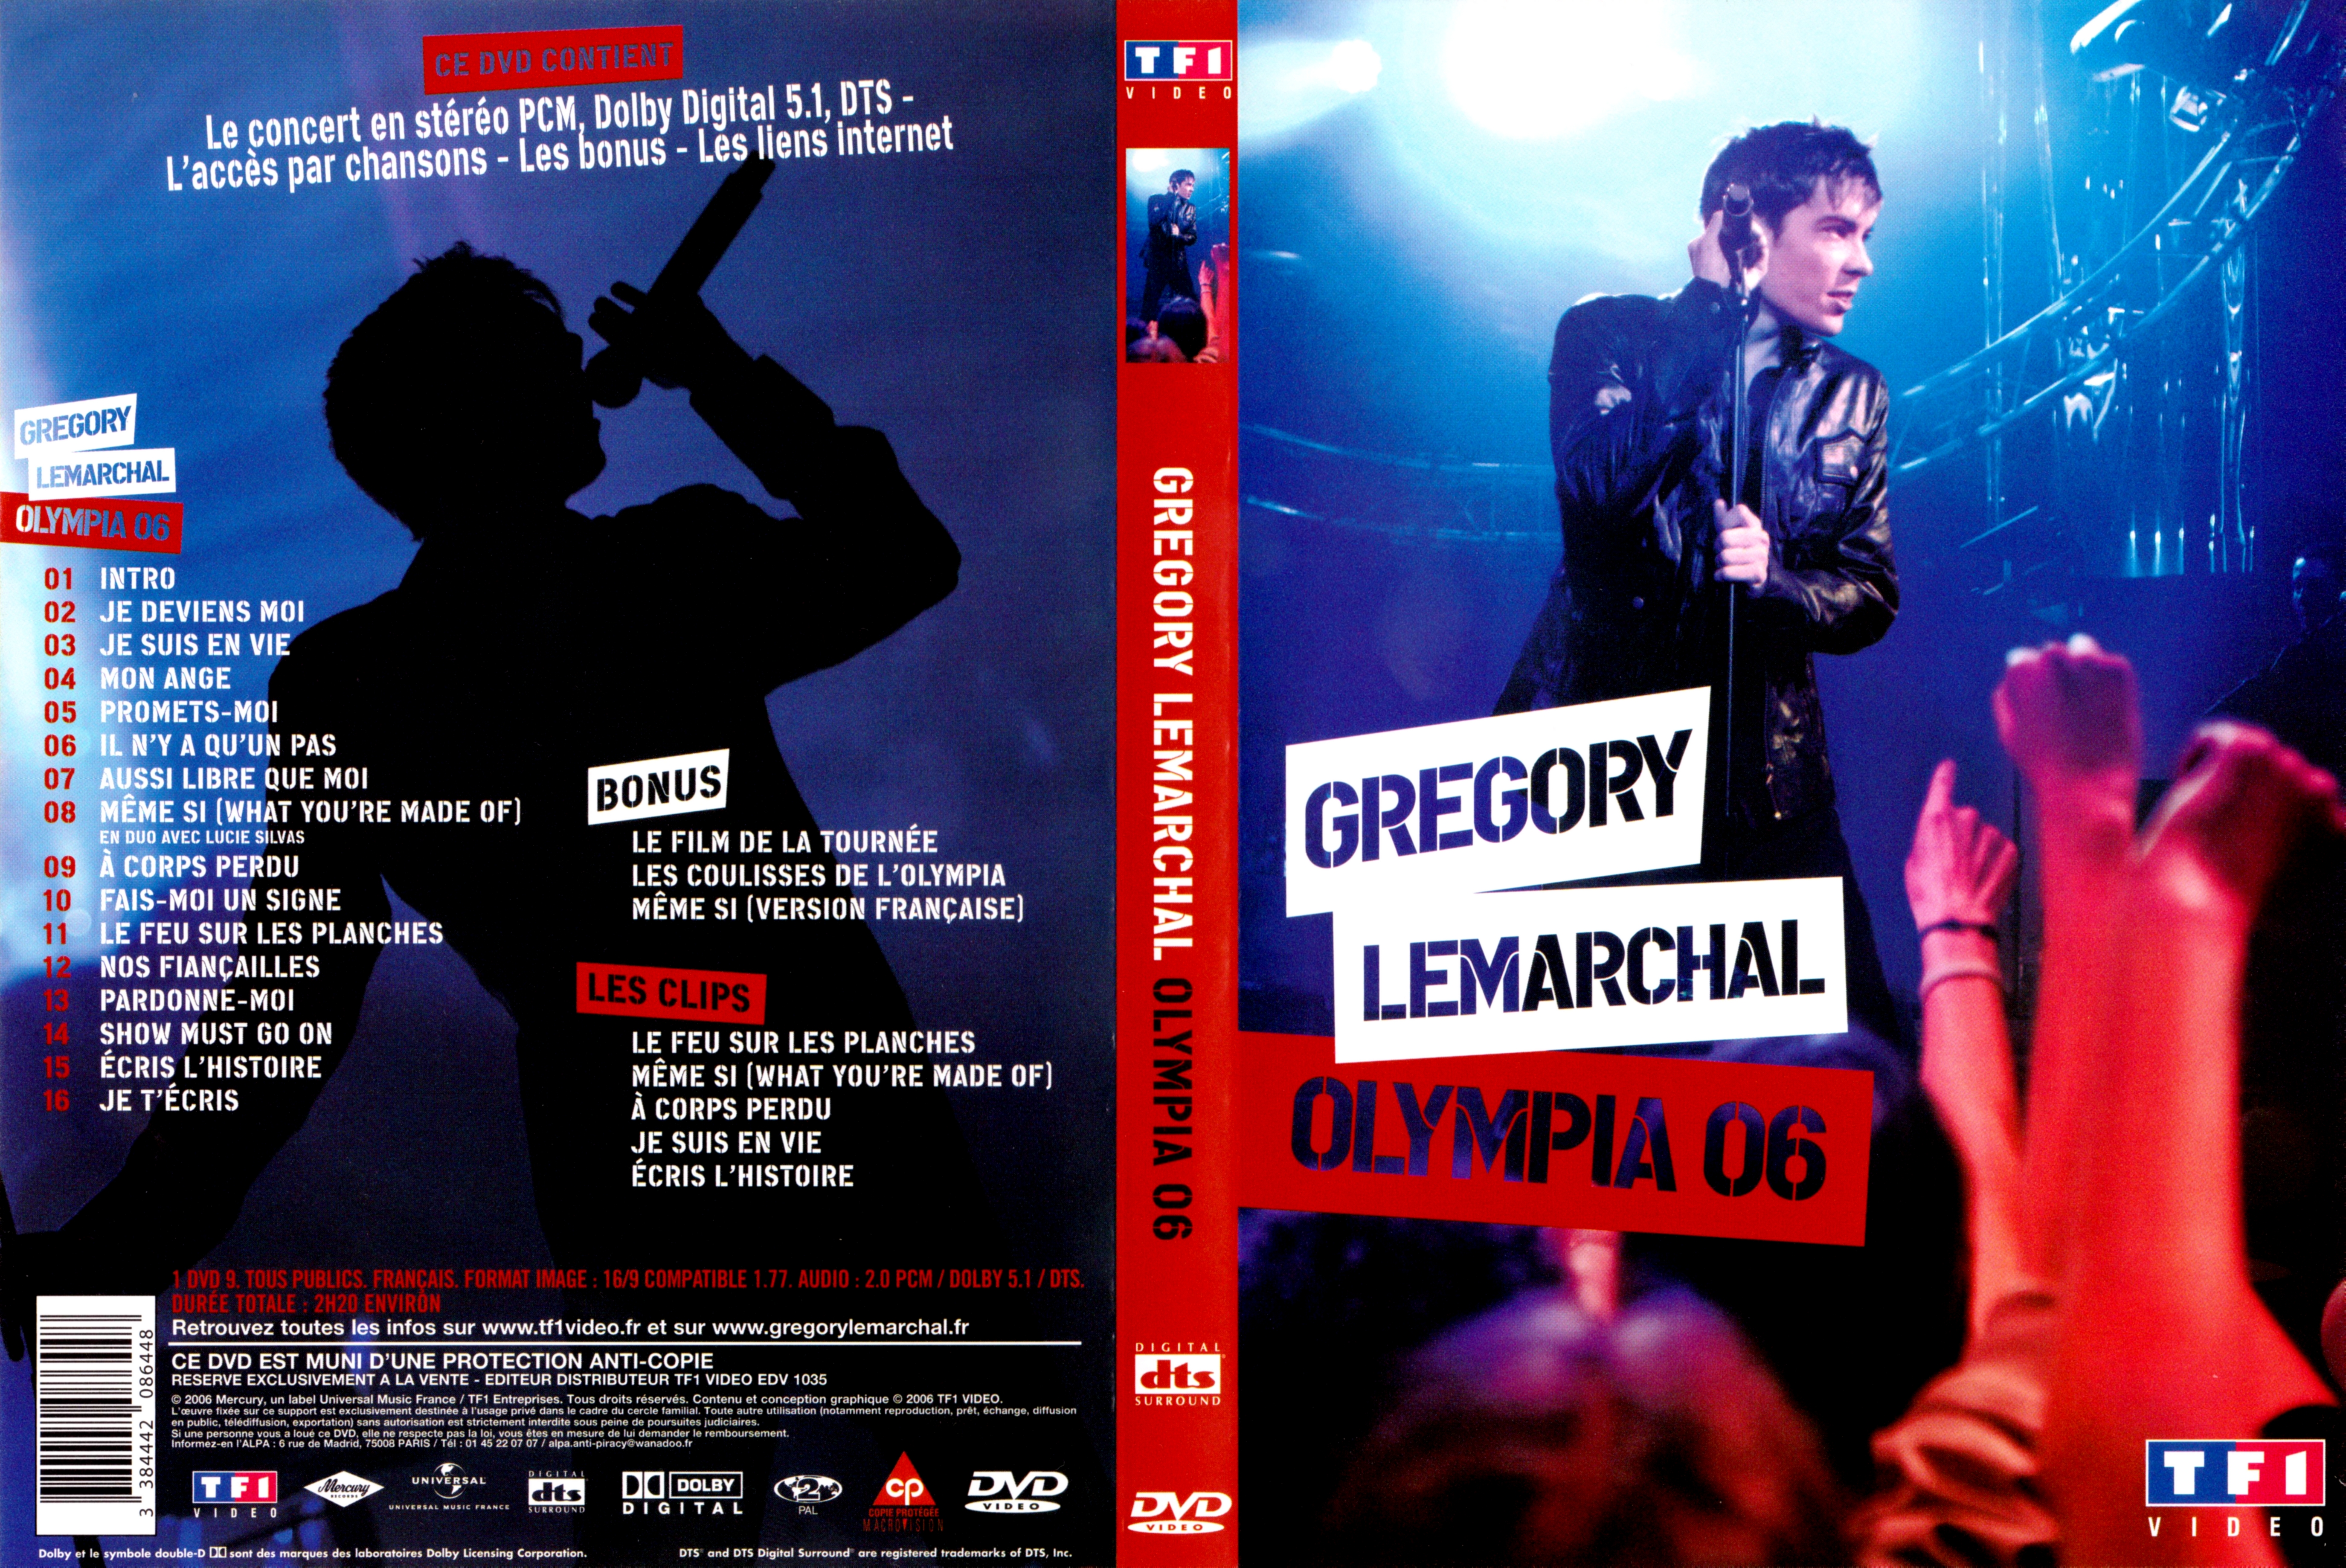 Jaquette DVD Gregory Lemarchal Olympia 06